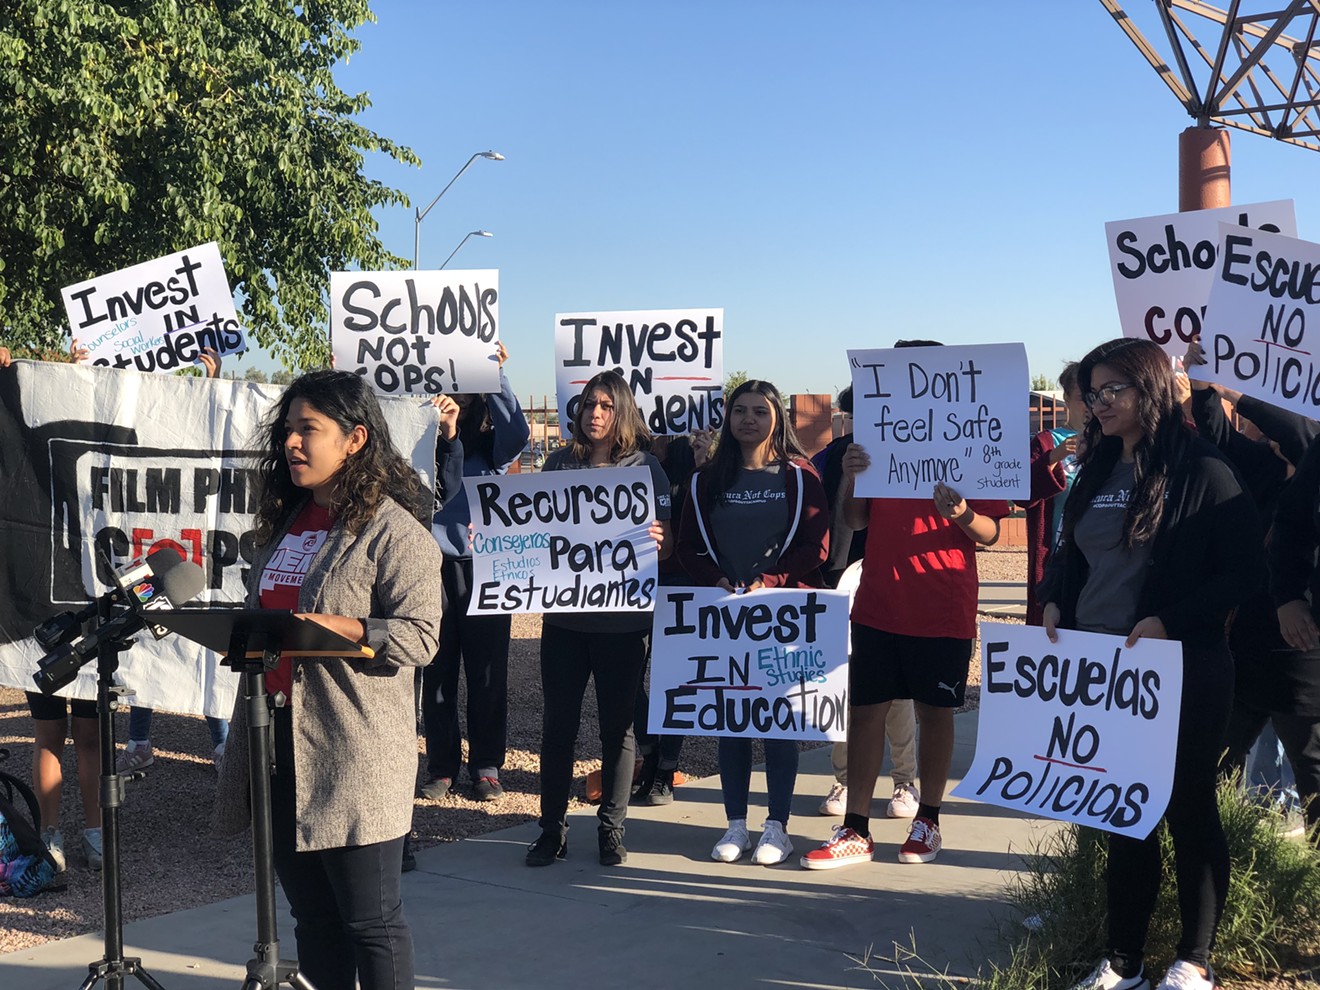 Maxima Guerrero, 29, youth campaign organizer at Puente Human Rights Movement, speaking at a press conference outside Isaac Middle School on Tuesday, October 29.